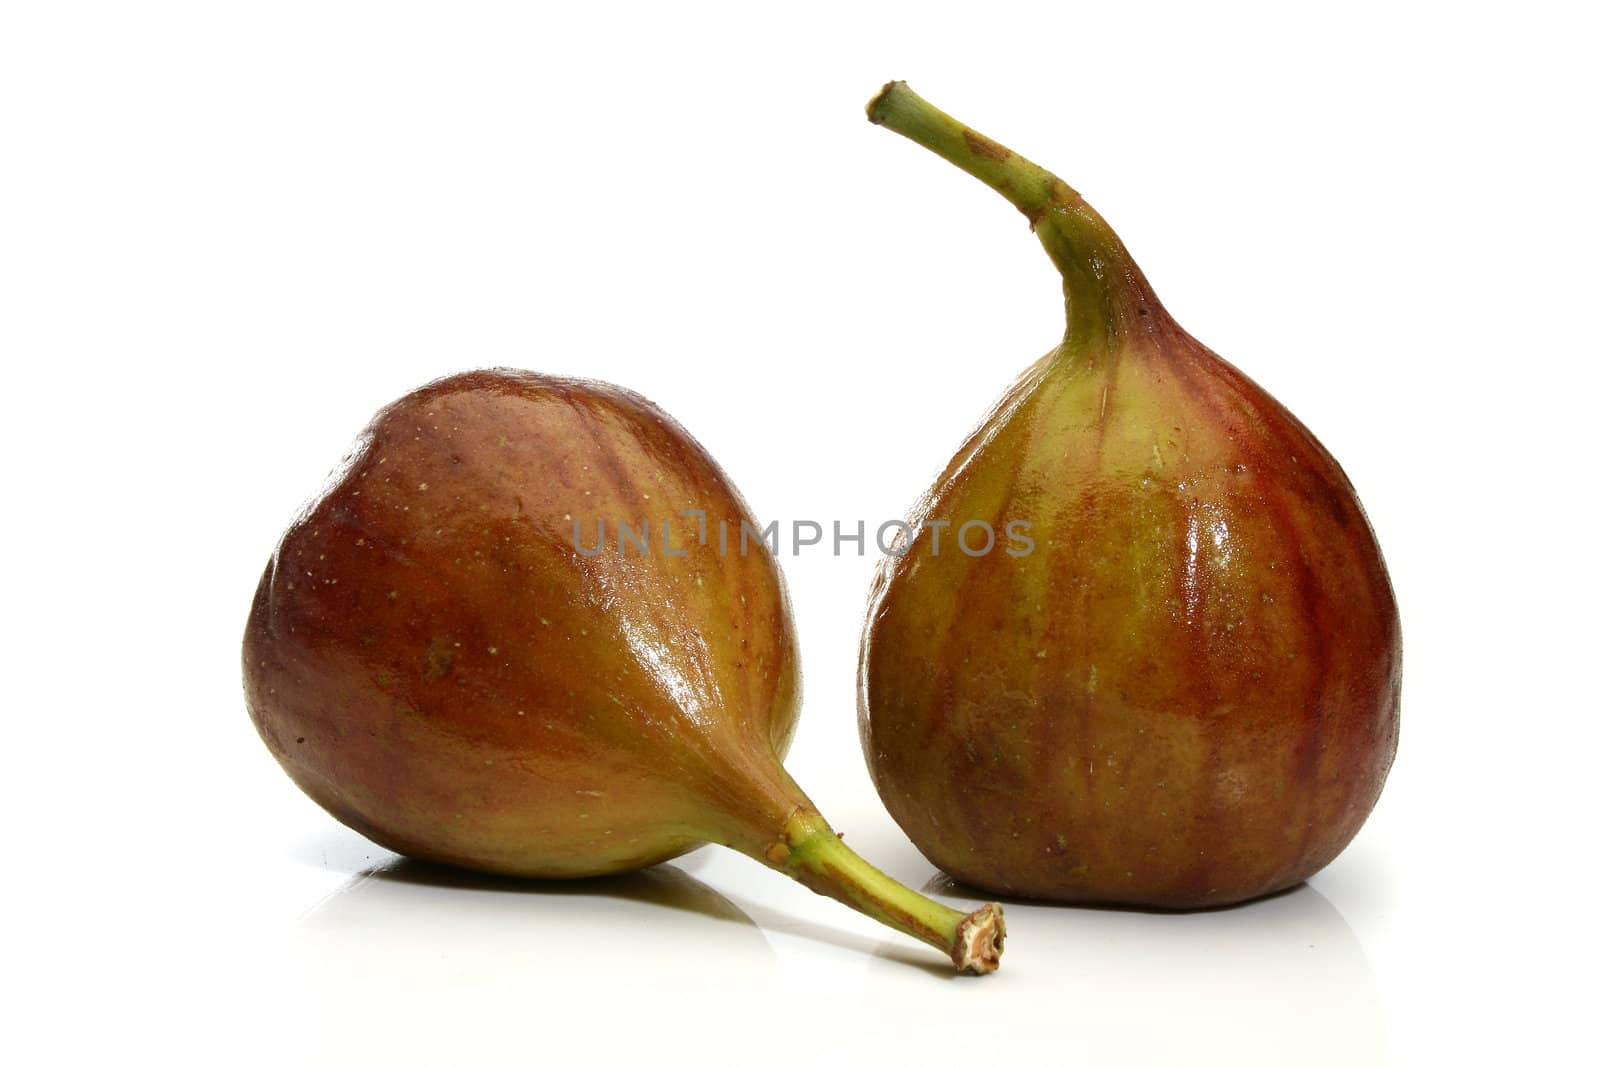 Two delicious figs over a white background